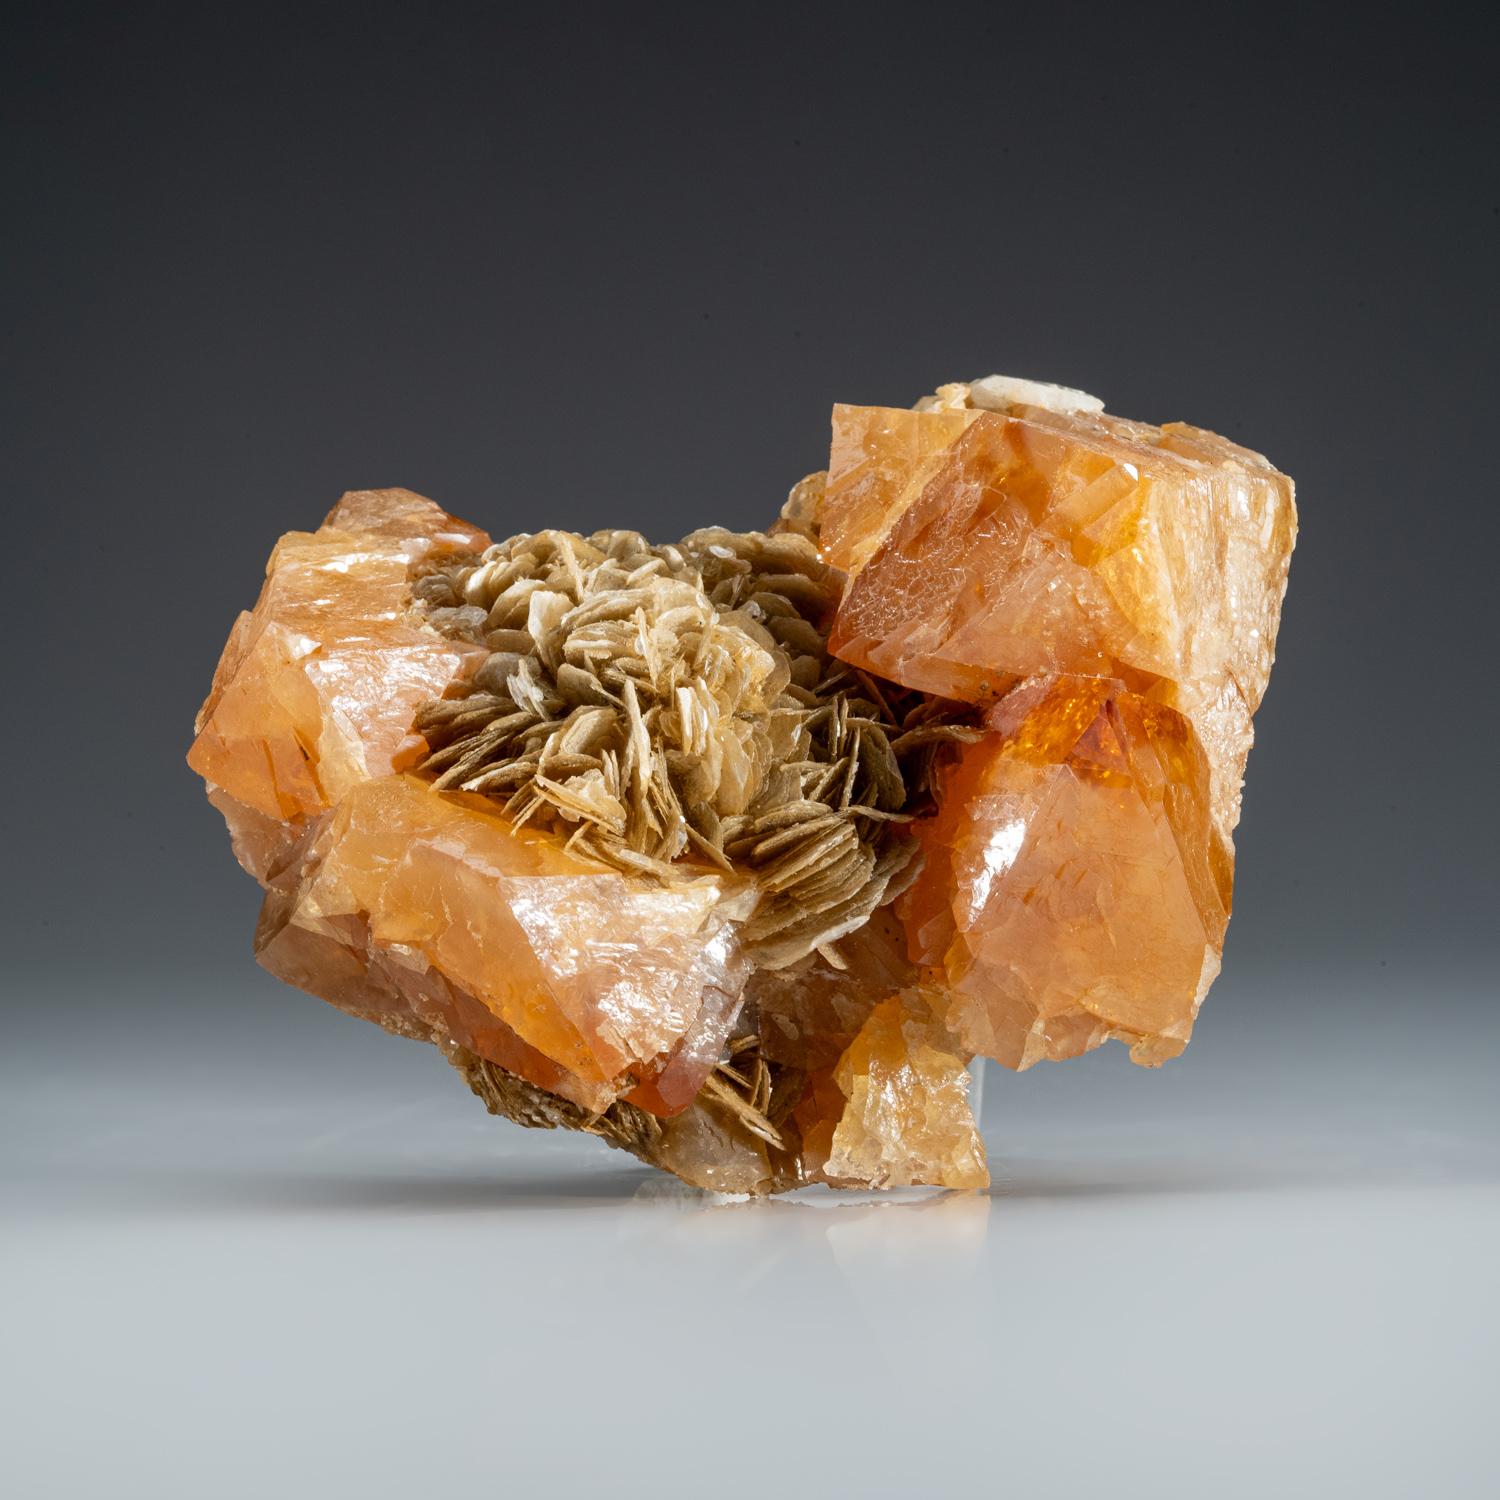 From Xuebaoding Mountain near Pingwu, Sichuan Province, China

Translucent orange scheelite crystals on plate of limonite-stained muscovite mica crystals. The scheelite crystals have lustrous faces with some faces.

Weight: 1.75 lbs, Dimensions: 4 x